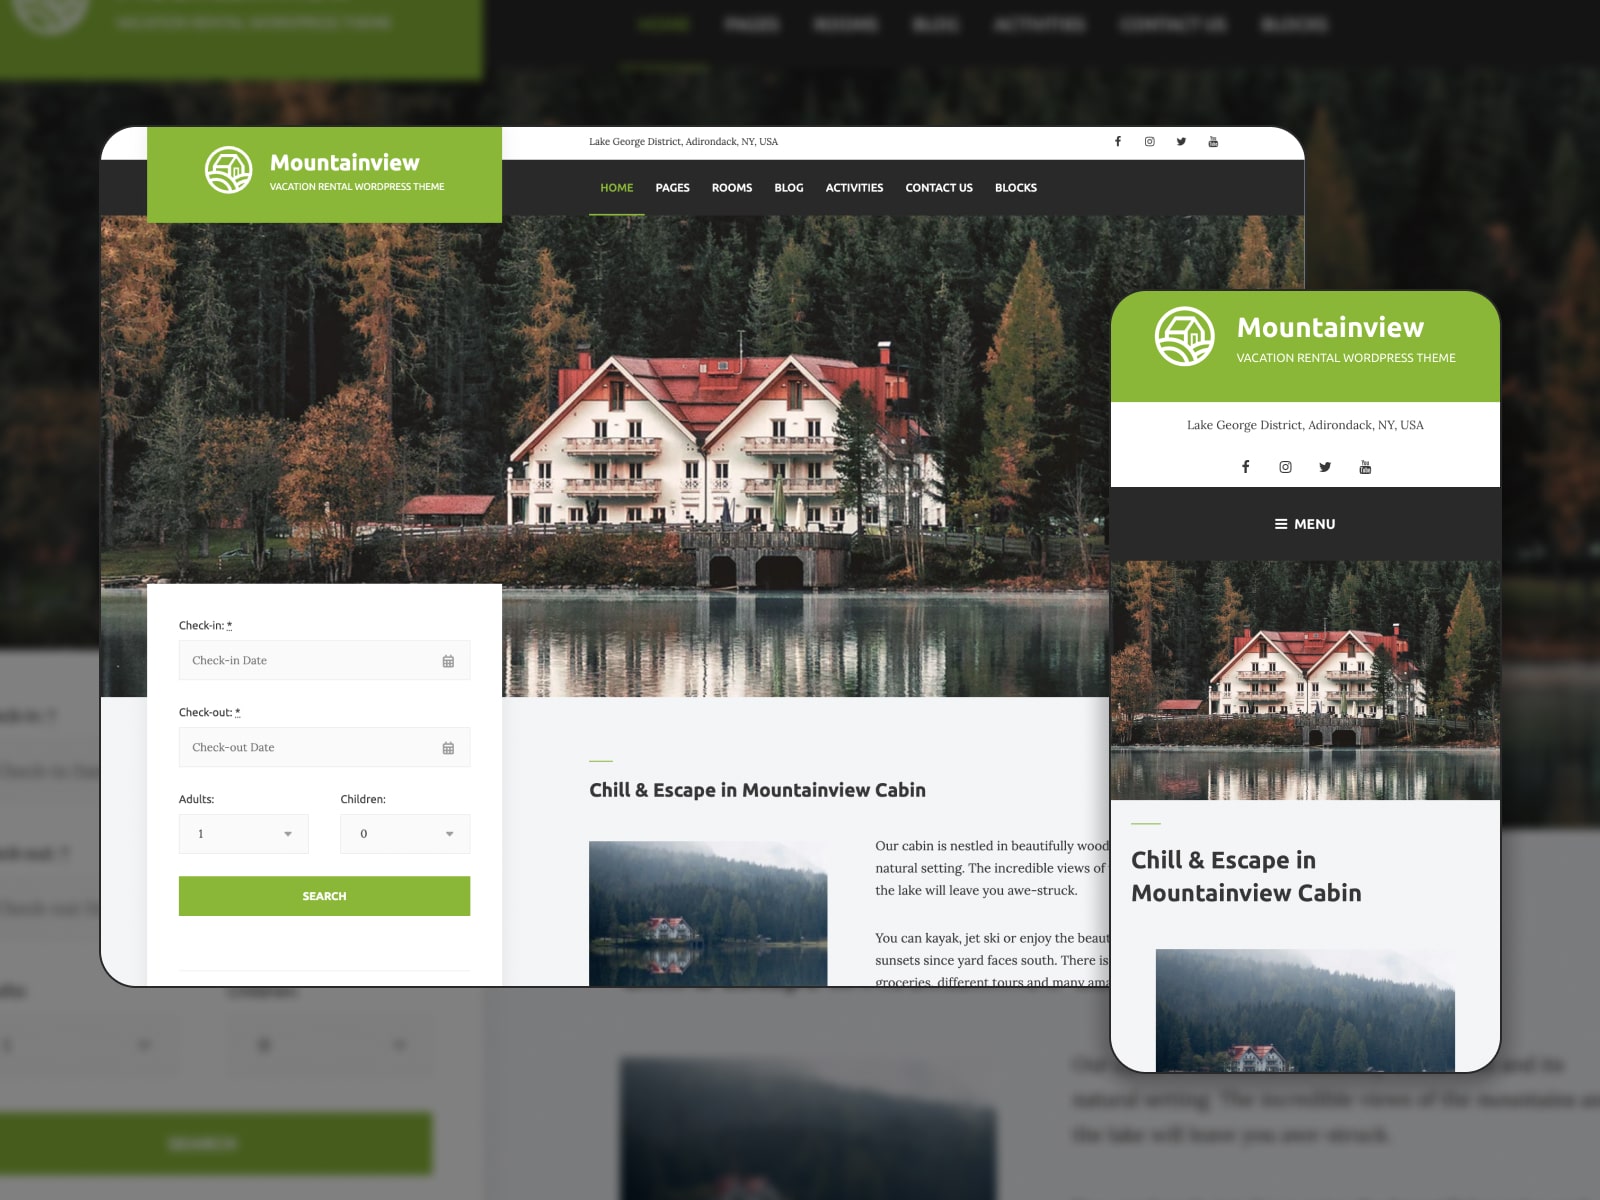 Collage if the Mountainview vacation rental booking theme for WordPress booking websites in green, light-green and white colors.